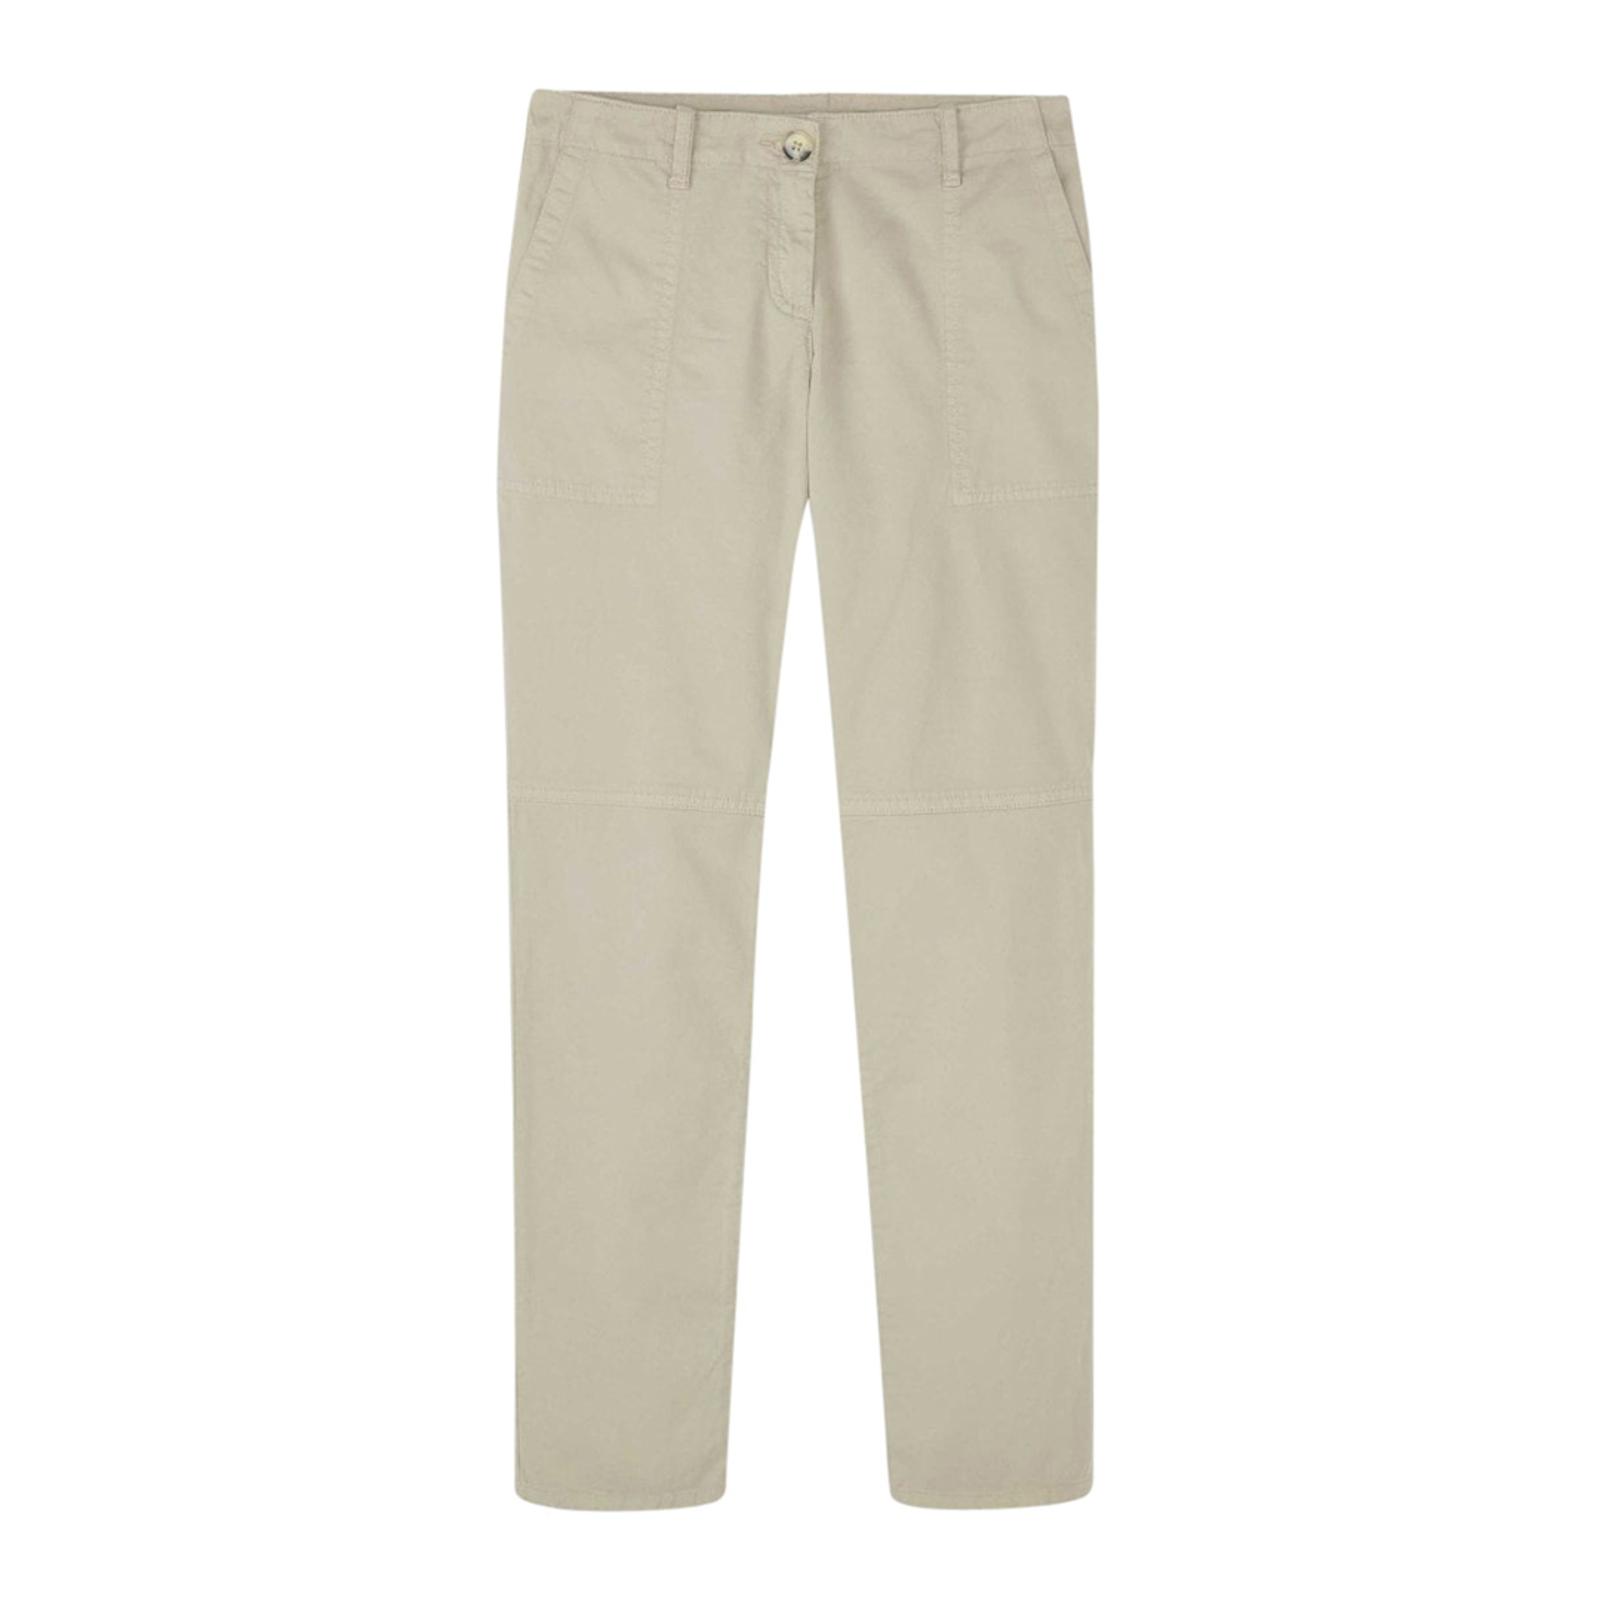 Stone Washed Cotton Stretch Utility Chinos - BrandAlley